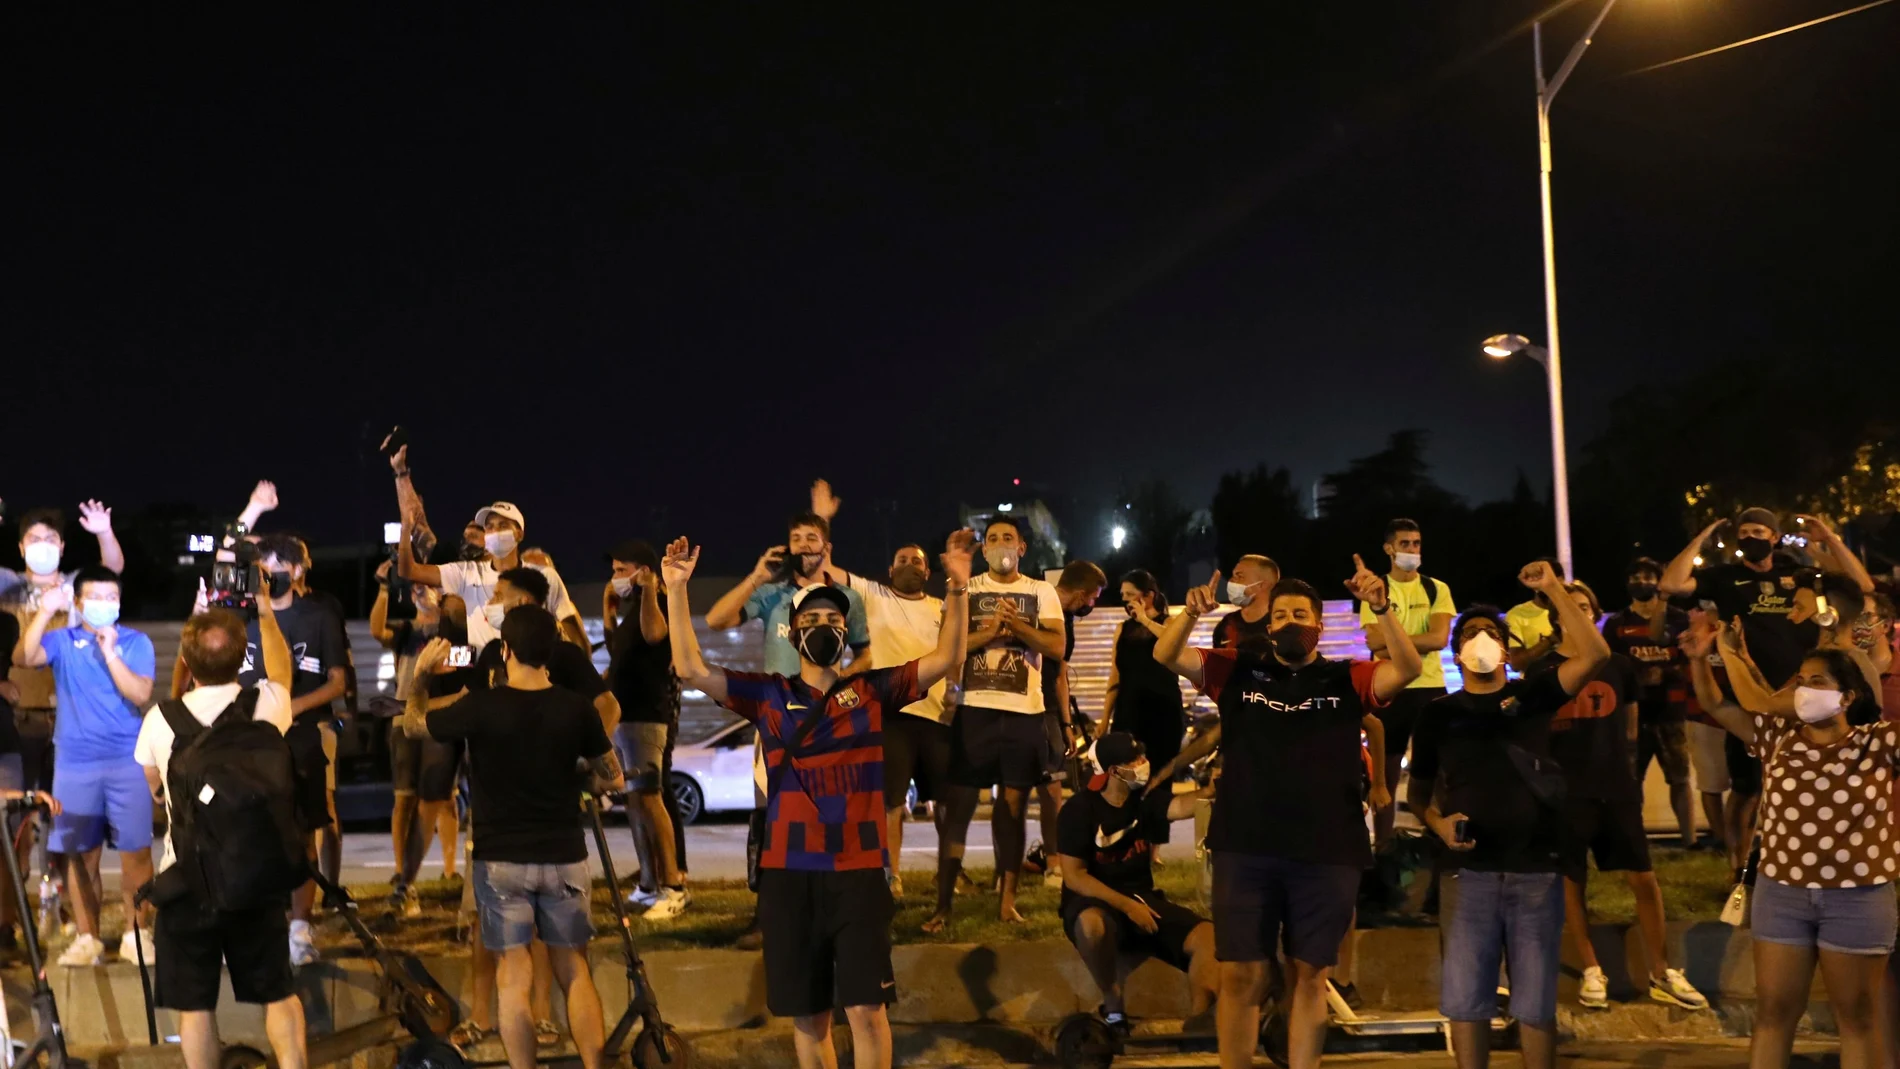 Barcelona fans are seen outside the Camp Nou after captain Lionel Messi told Barcelona he wishes to leave the club immediately